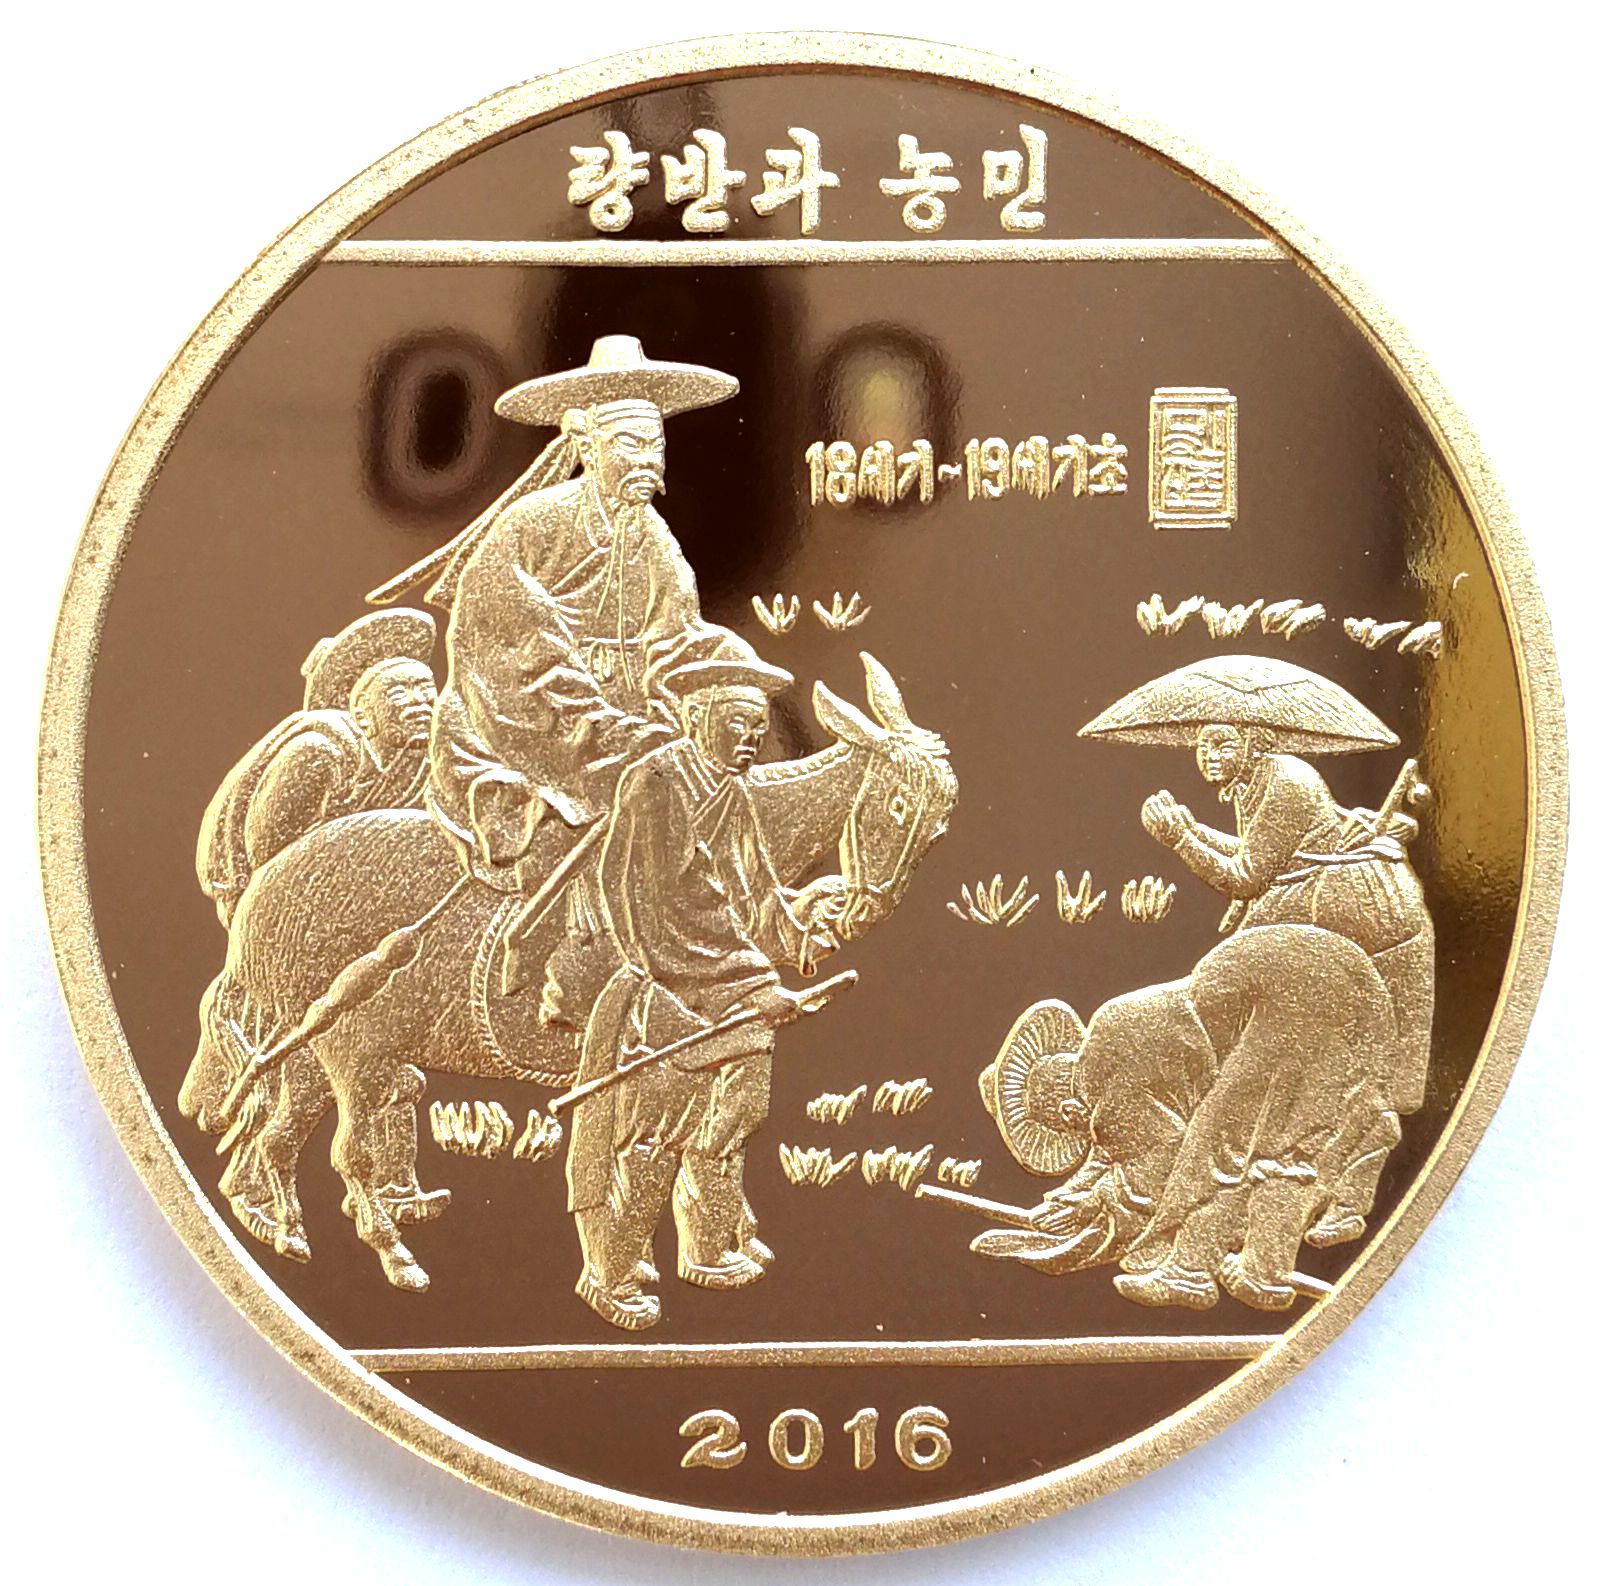 L3207, Korea Painting Commemorative Coin "Meeting on the Road", Brass 2016